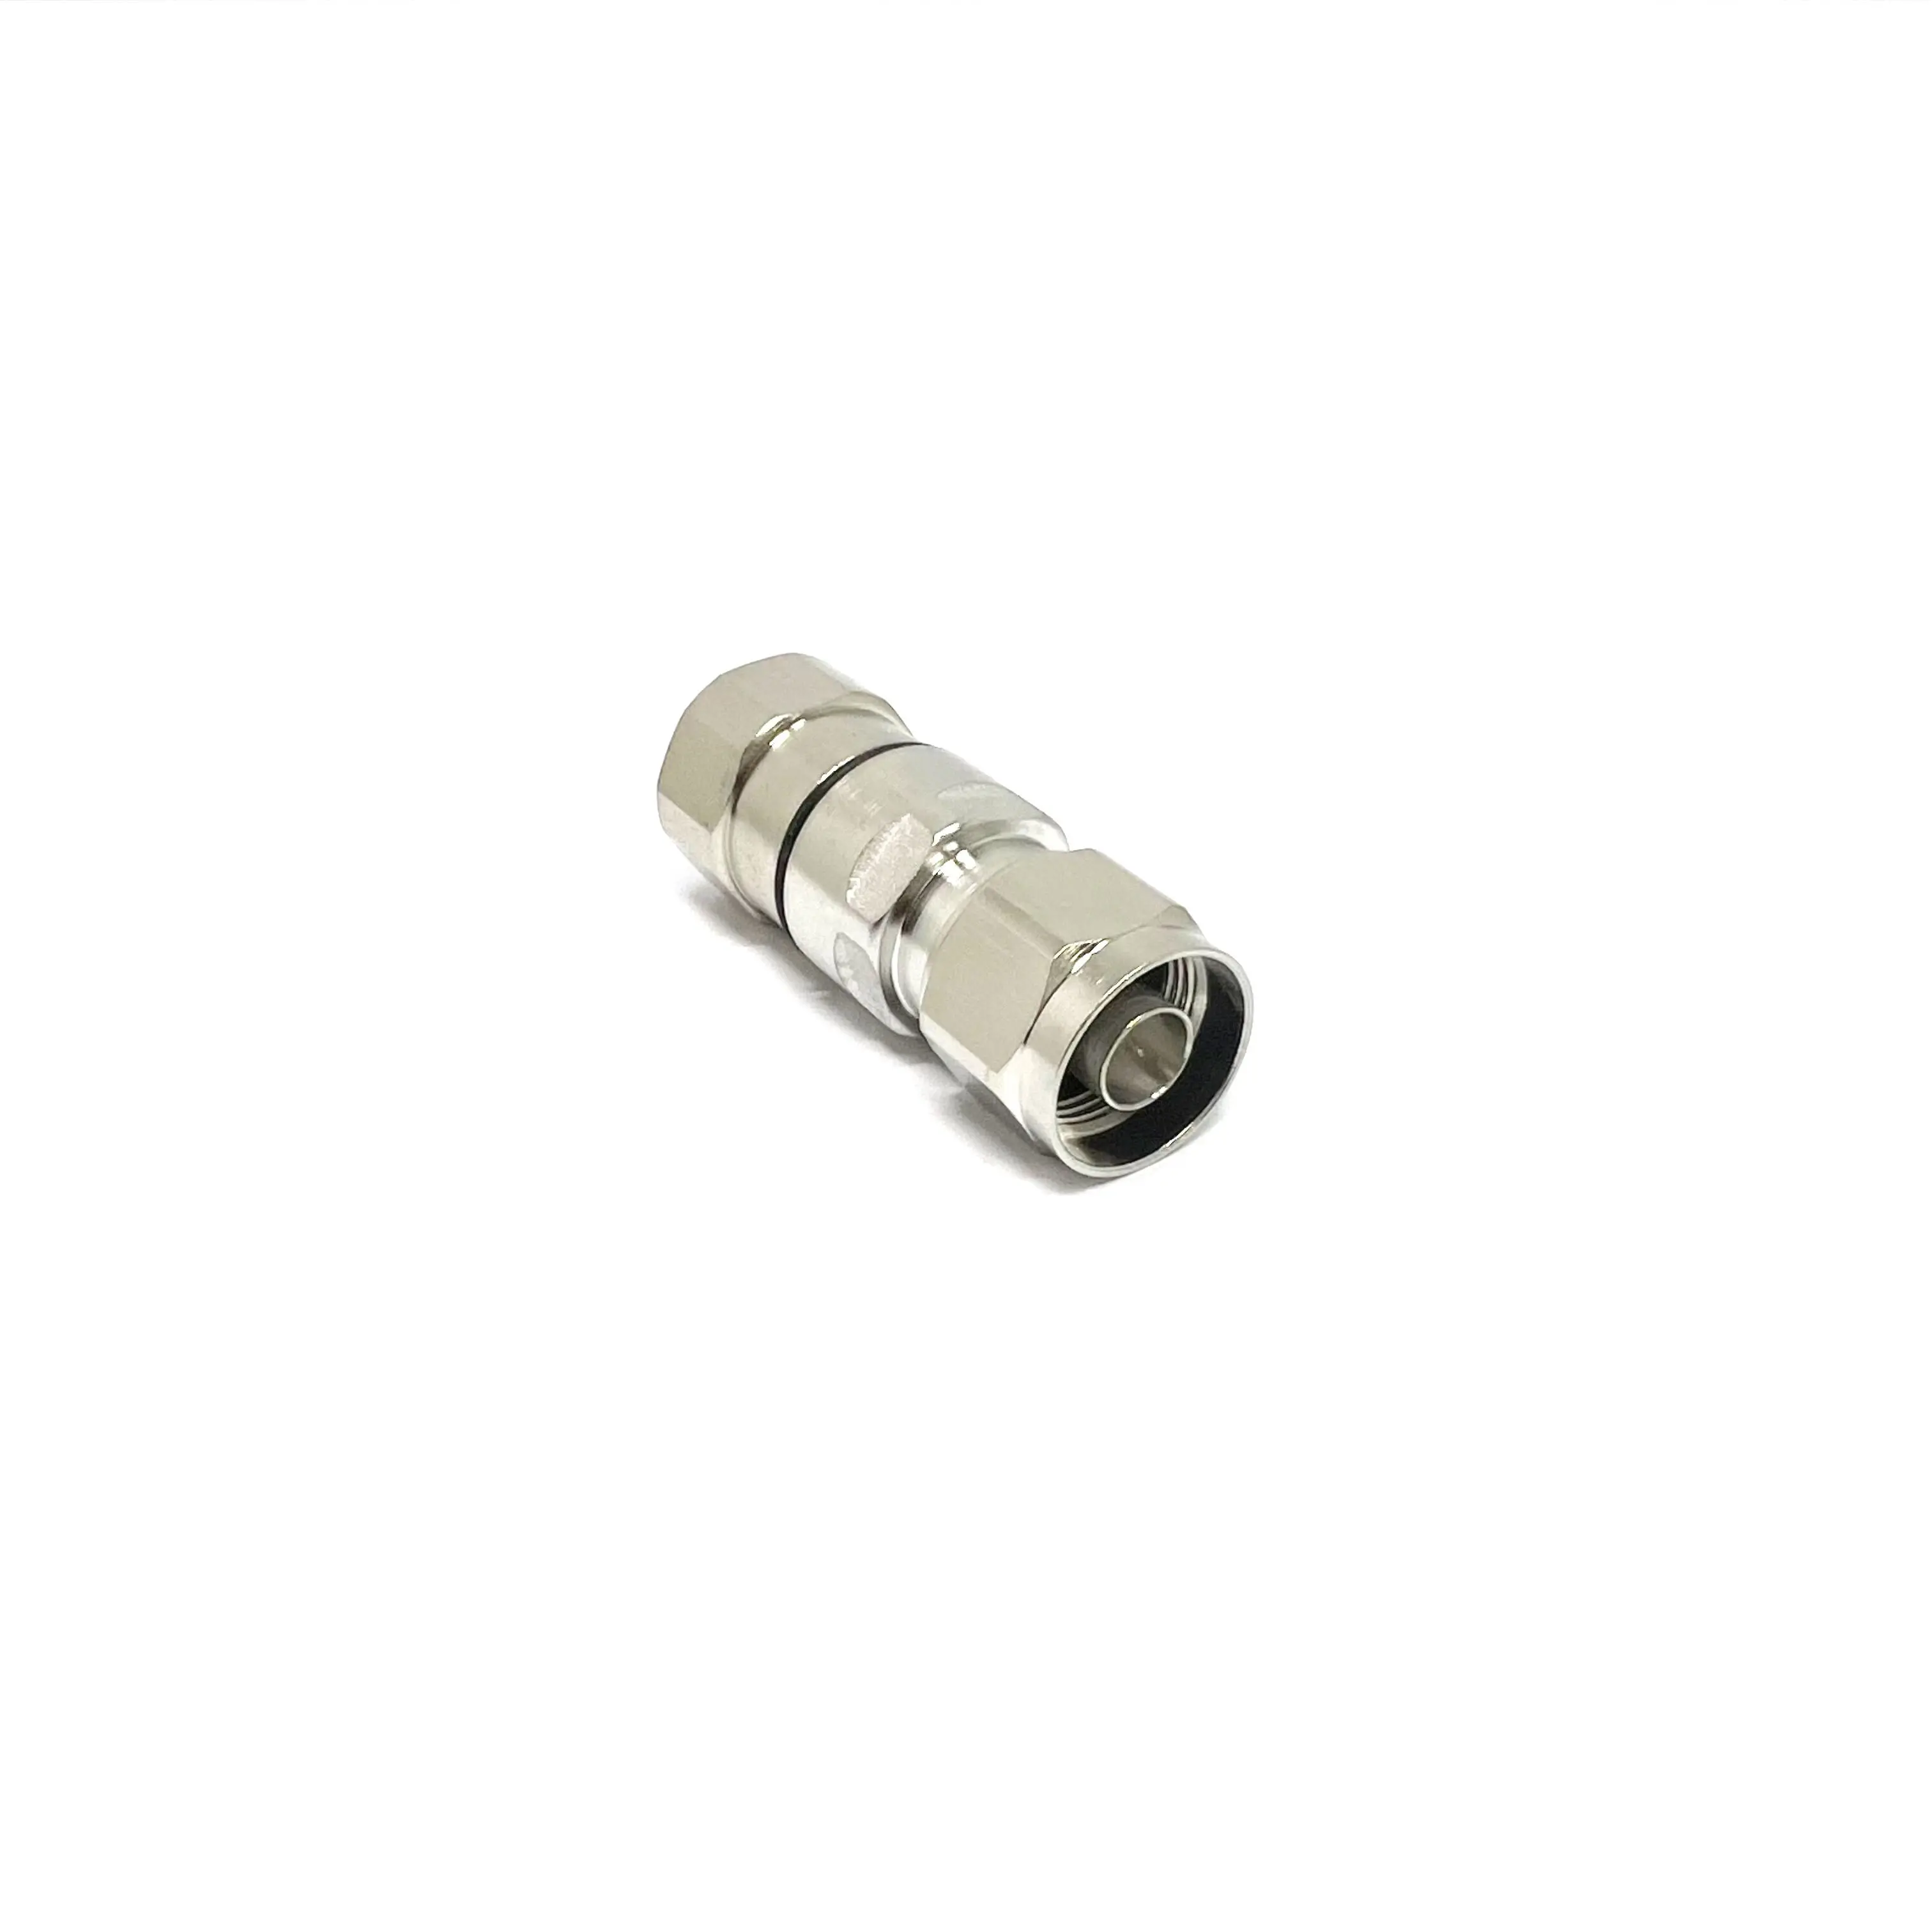 rf plate with Nickel coaxial connector n type male plug clamp for 1/2 feeder coaxial cable details